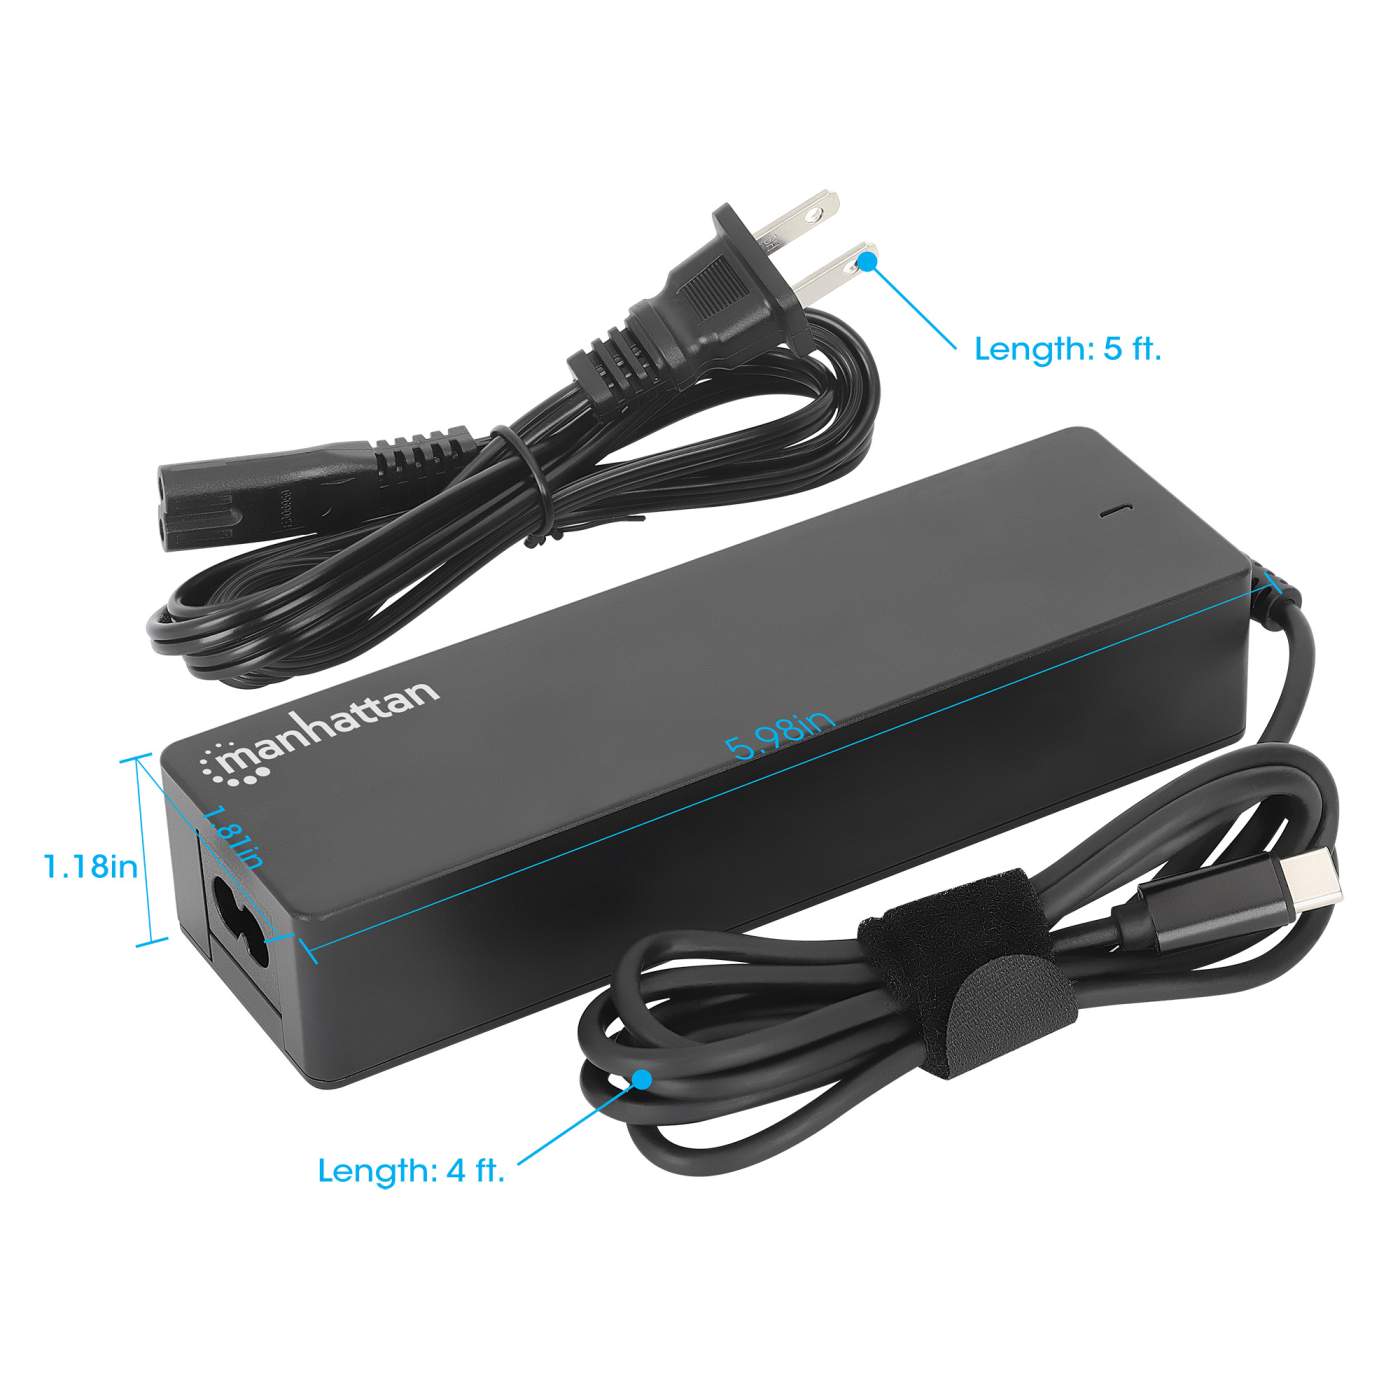 USB-C Power Delivery Laptop Charger - 100 W Image 6